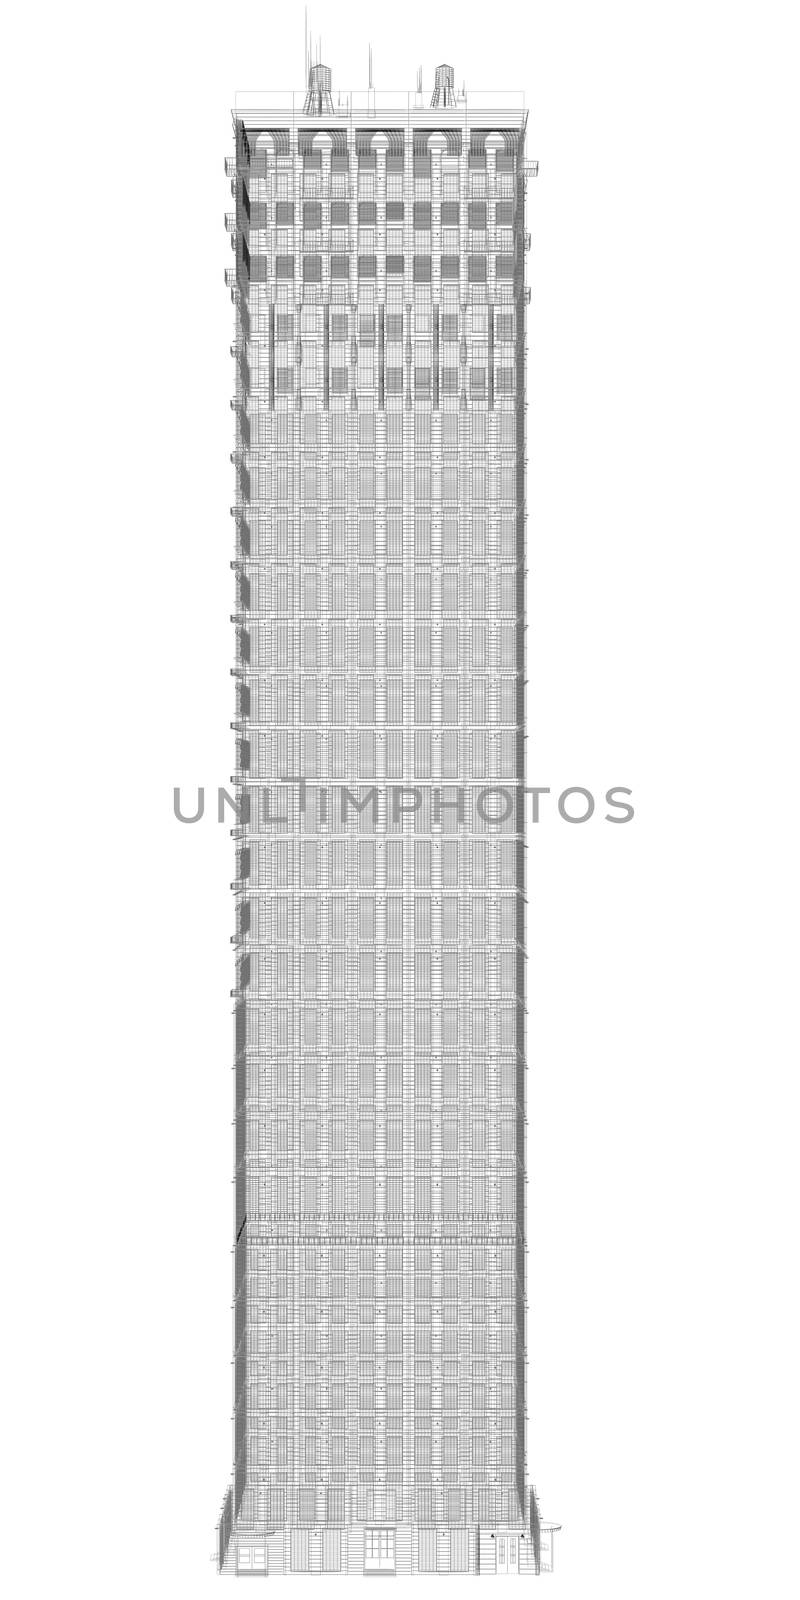 Highly detailed building. Isolated wire-frame render on a white background